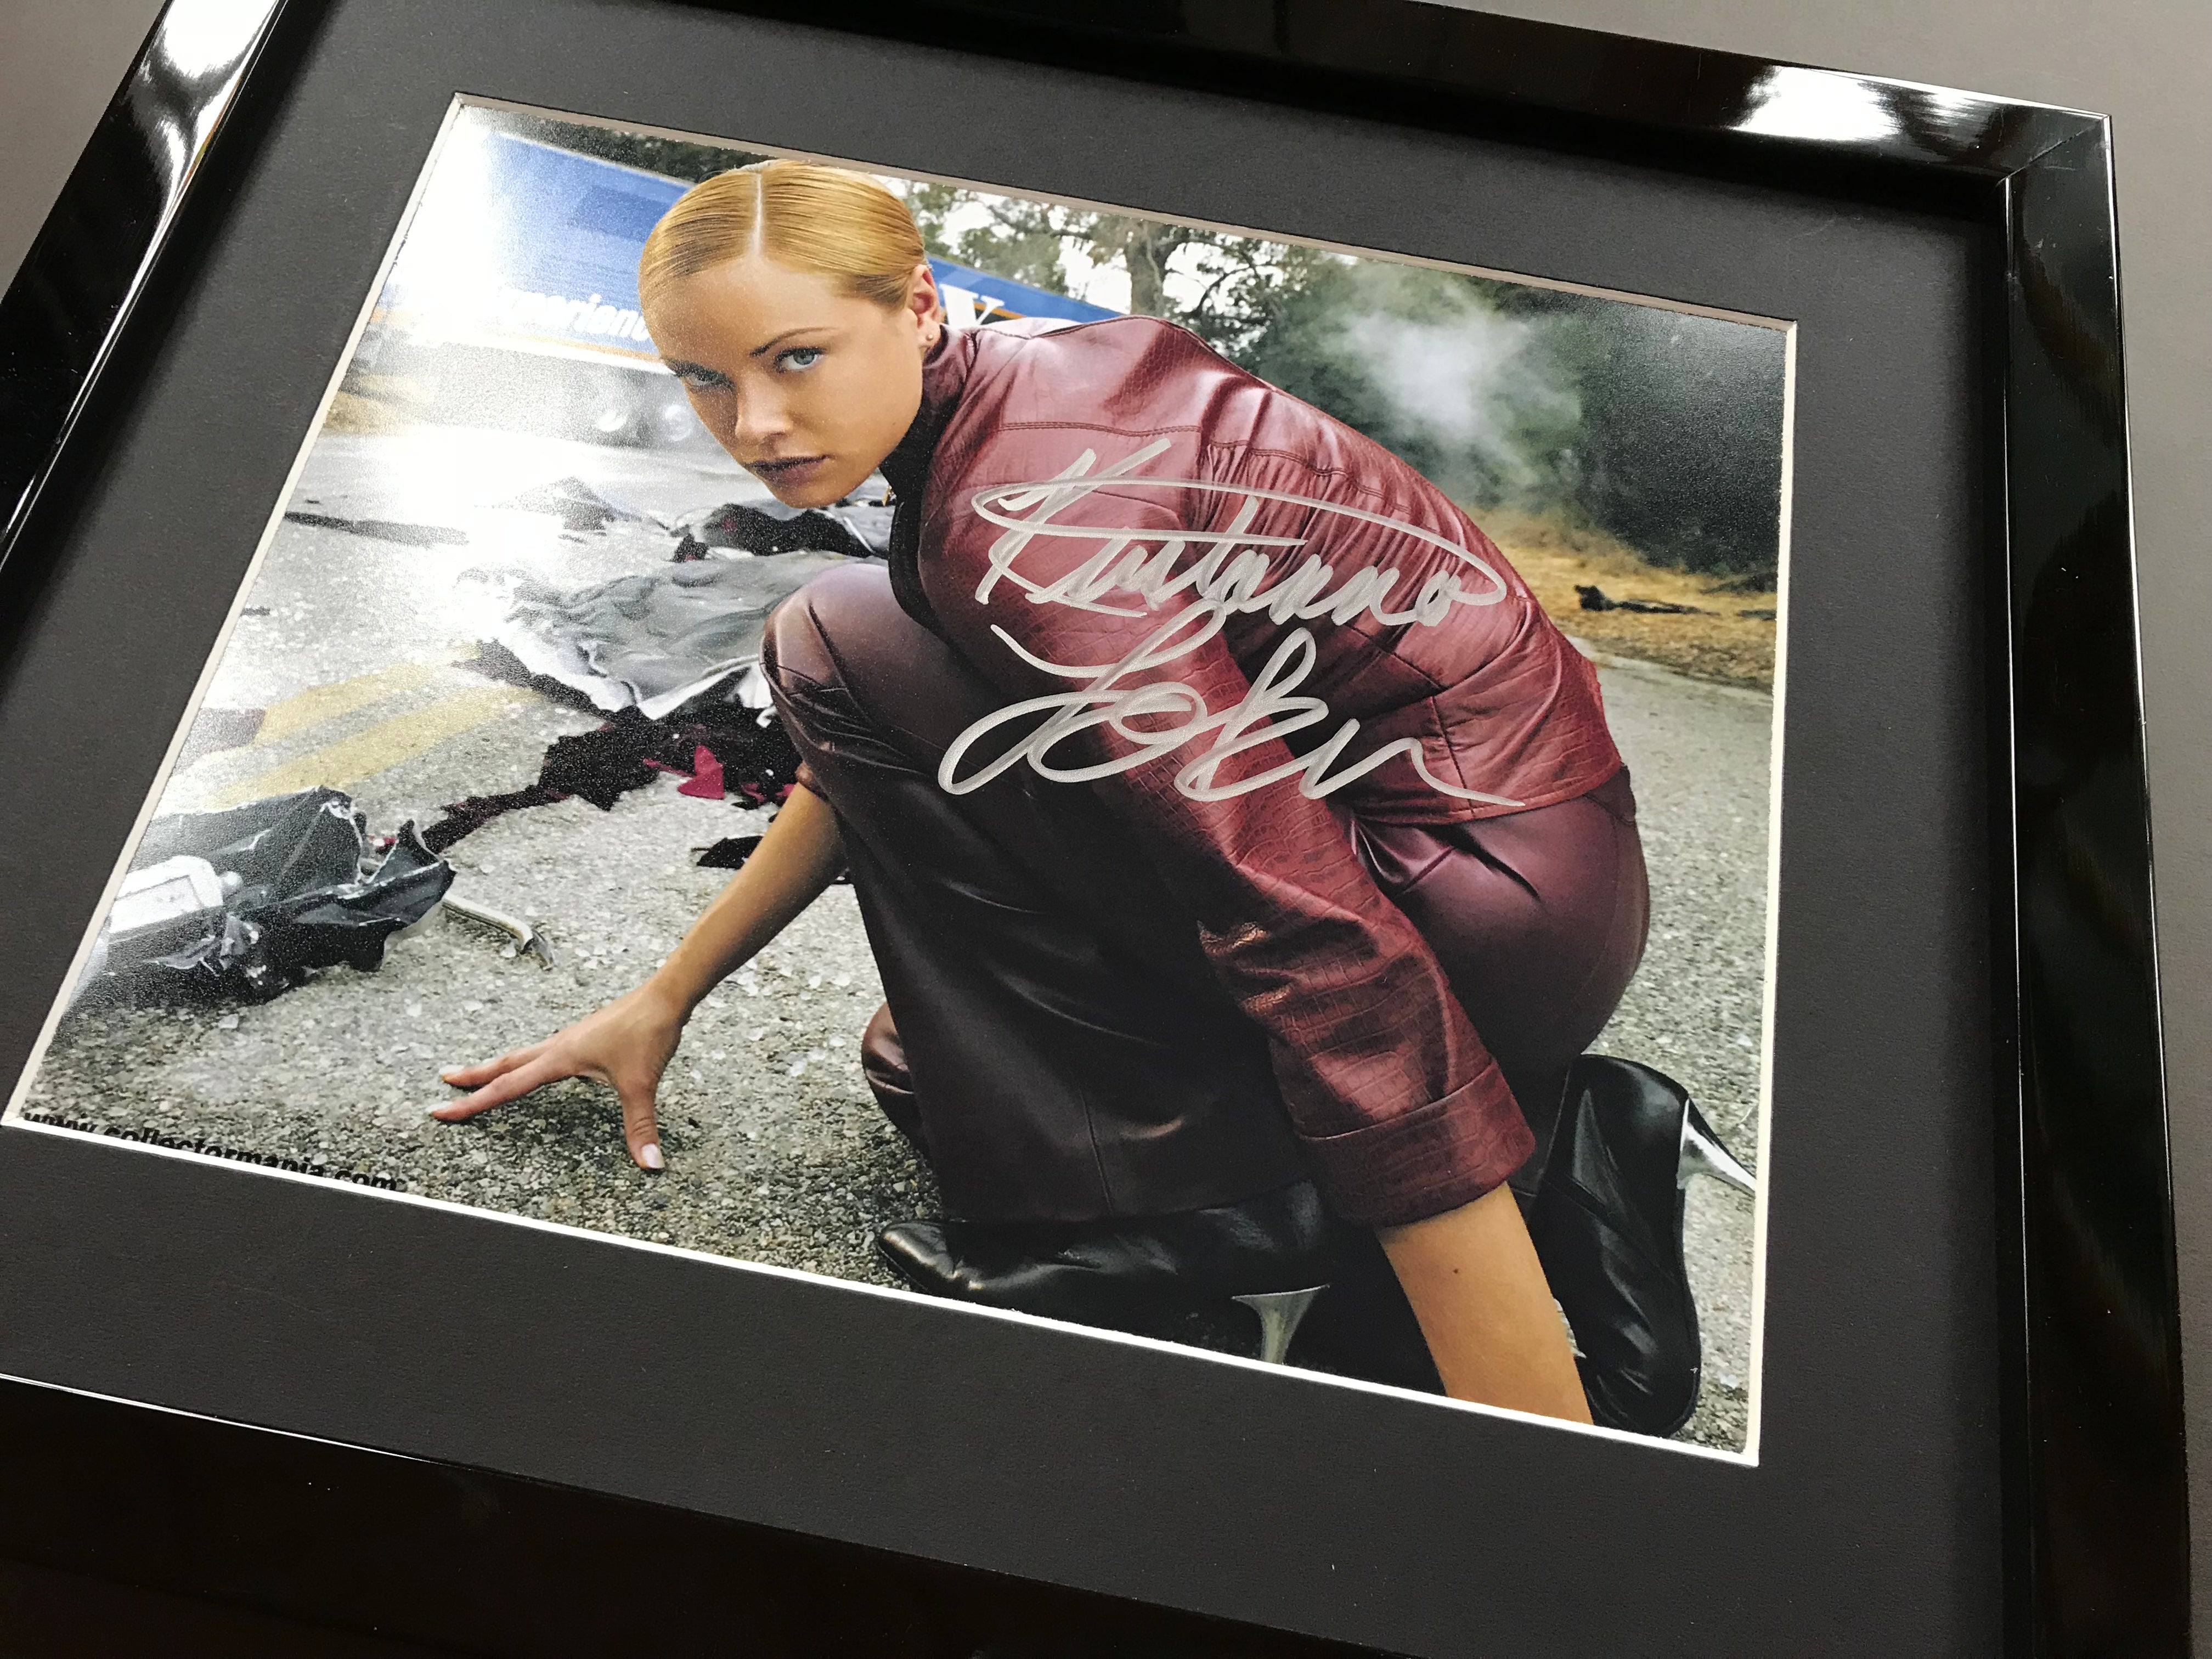 Terminator 3: Rise of the Machines (2003) - Kristanna Loken as the T-X - A Signed Still